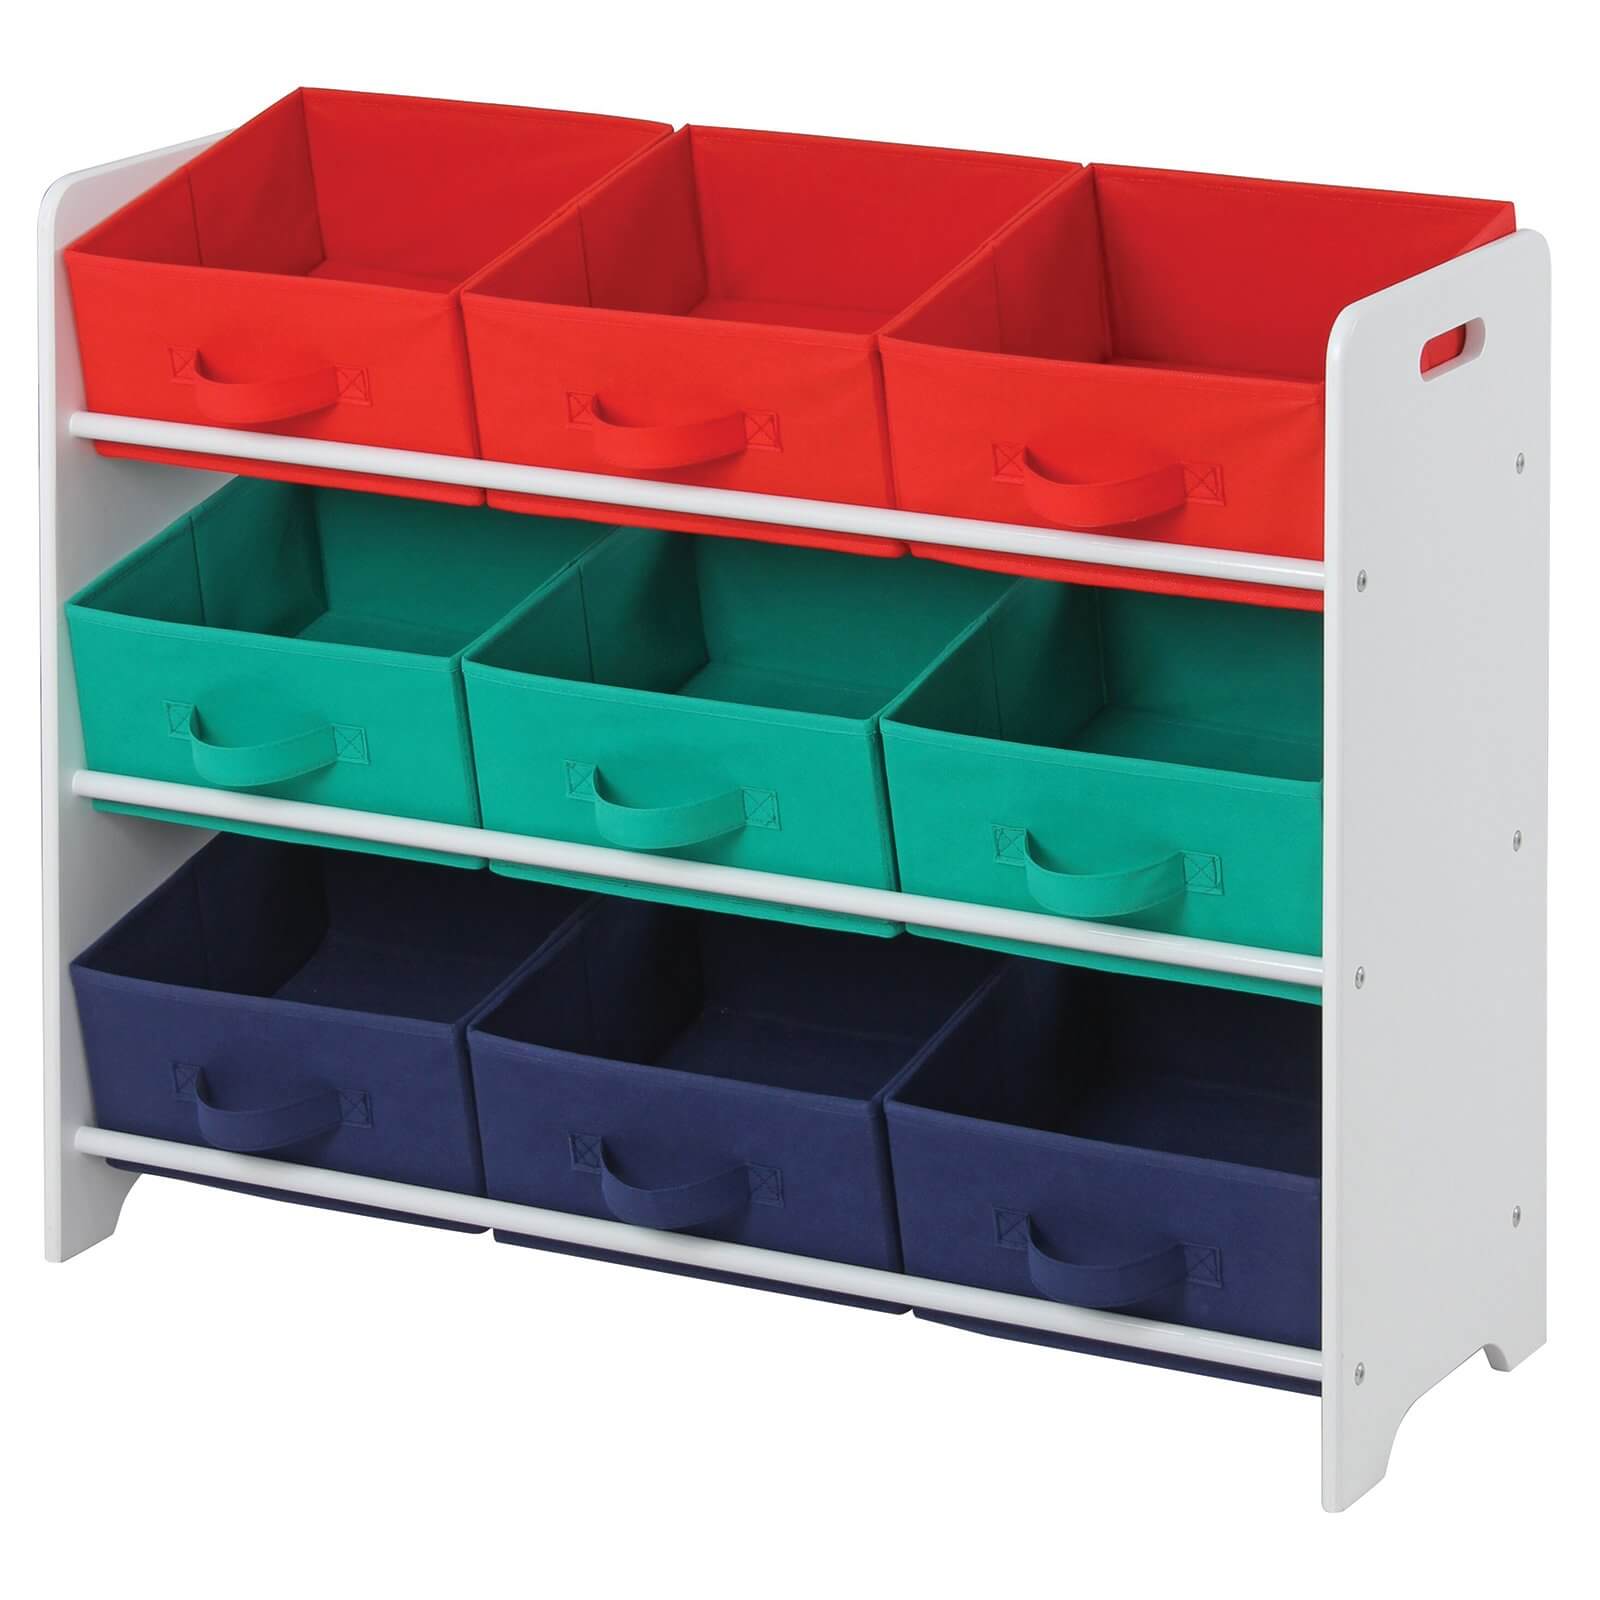 Photo of Kids Cube 3x3 Unit With 9 Inserts